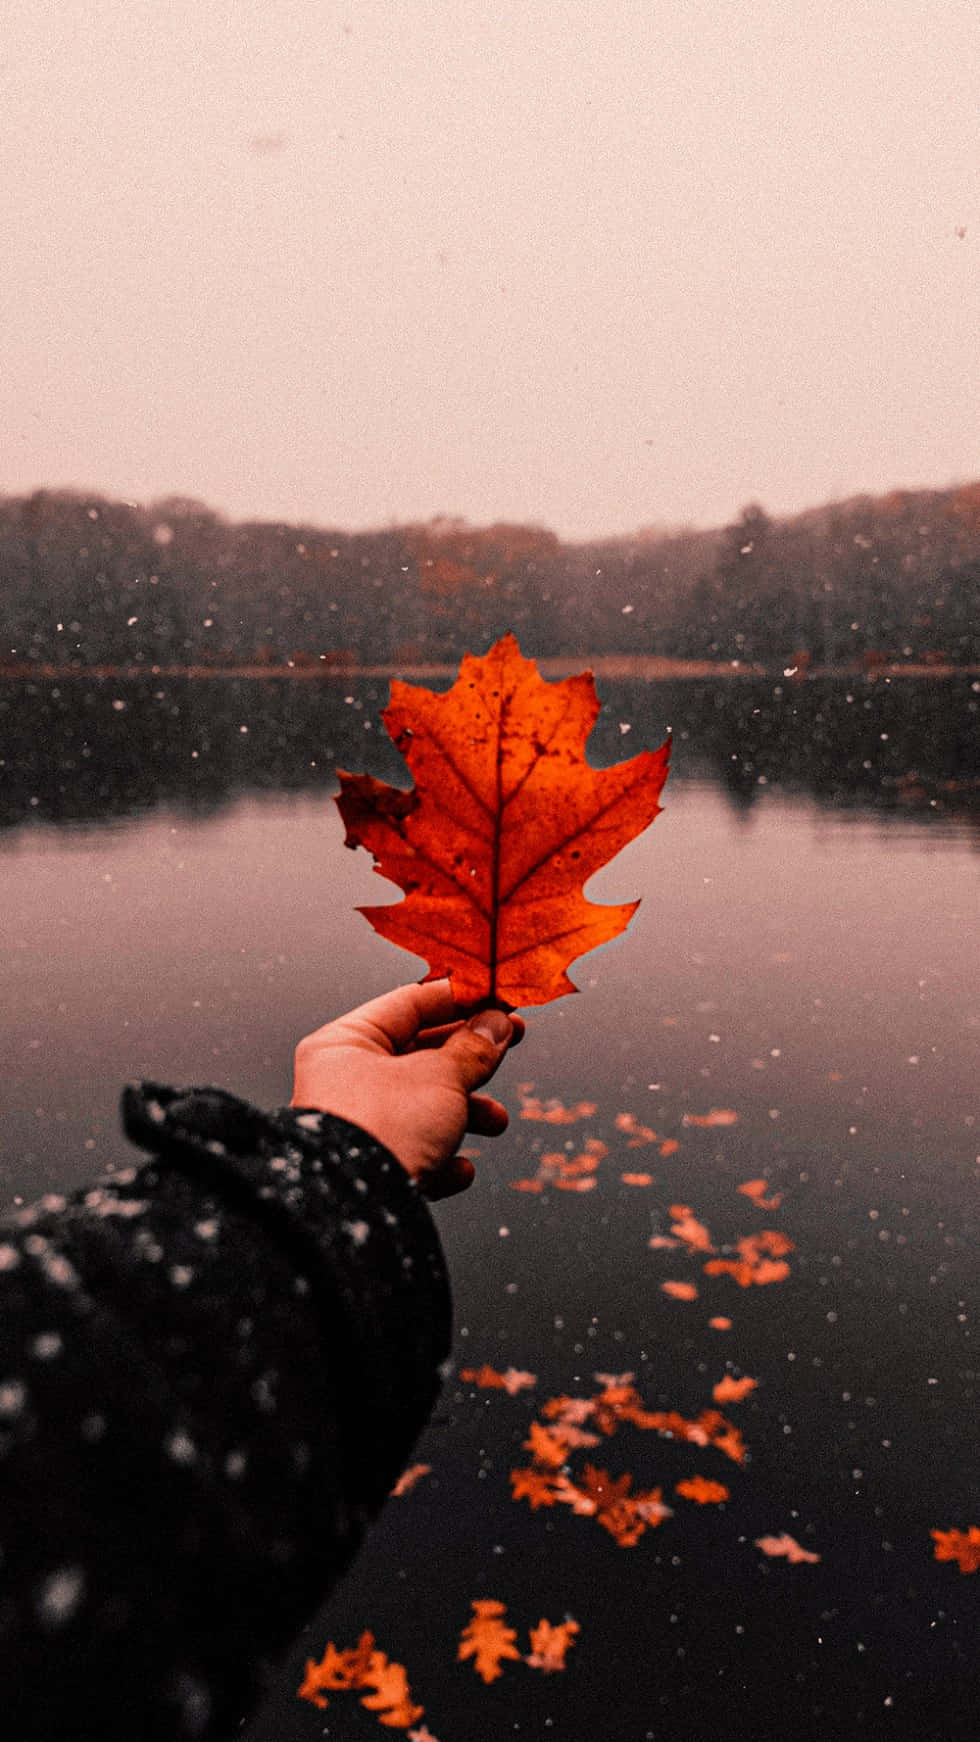 Download Enjoying the beauty of fall | Wallpapers.com